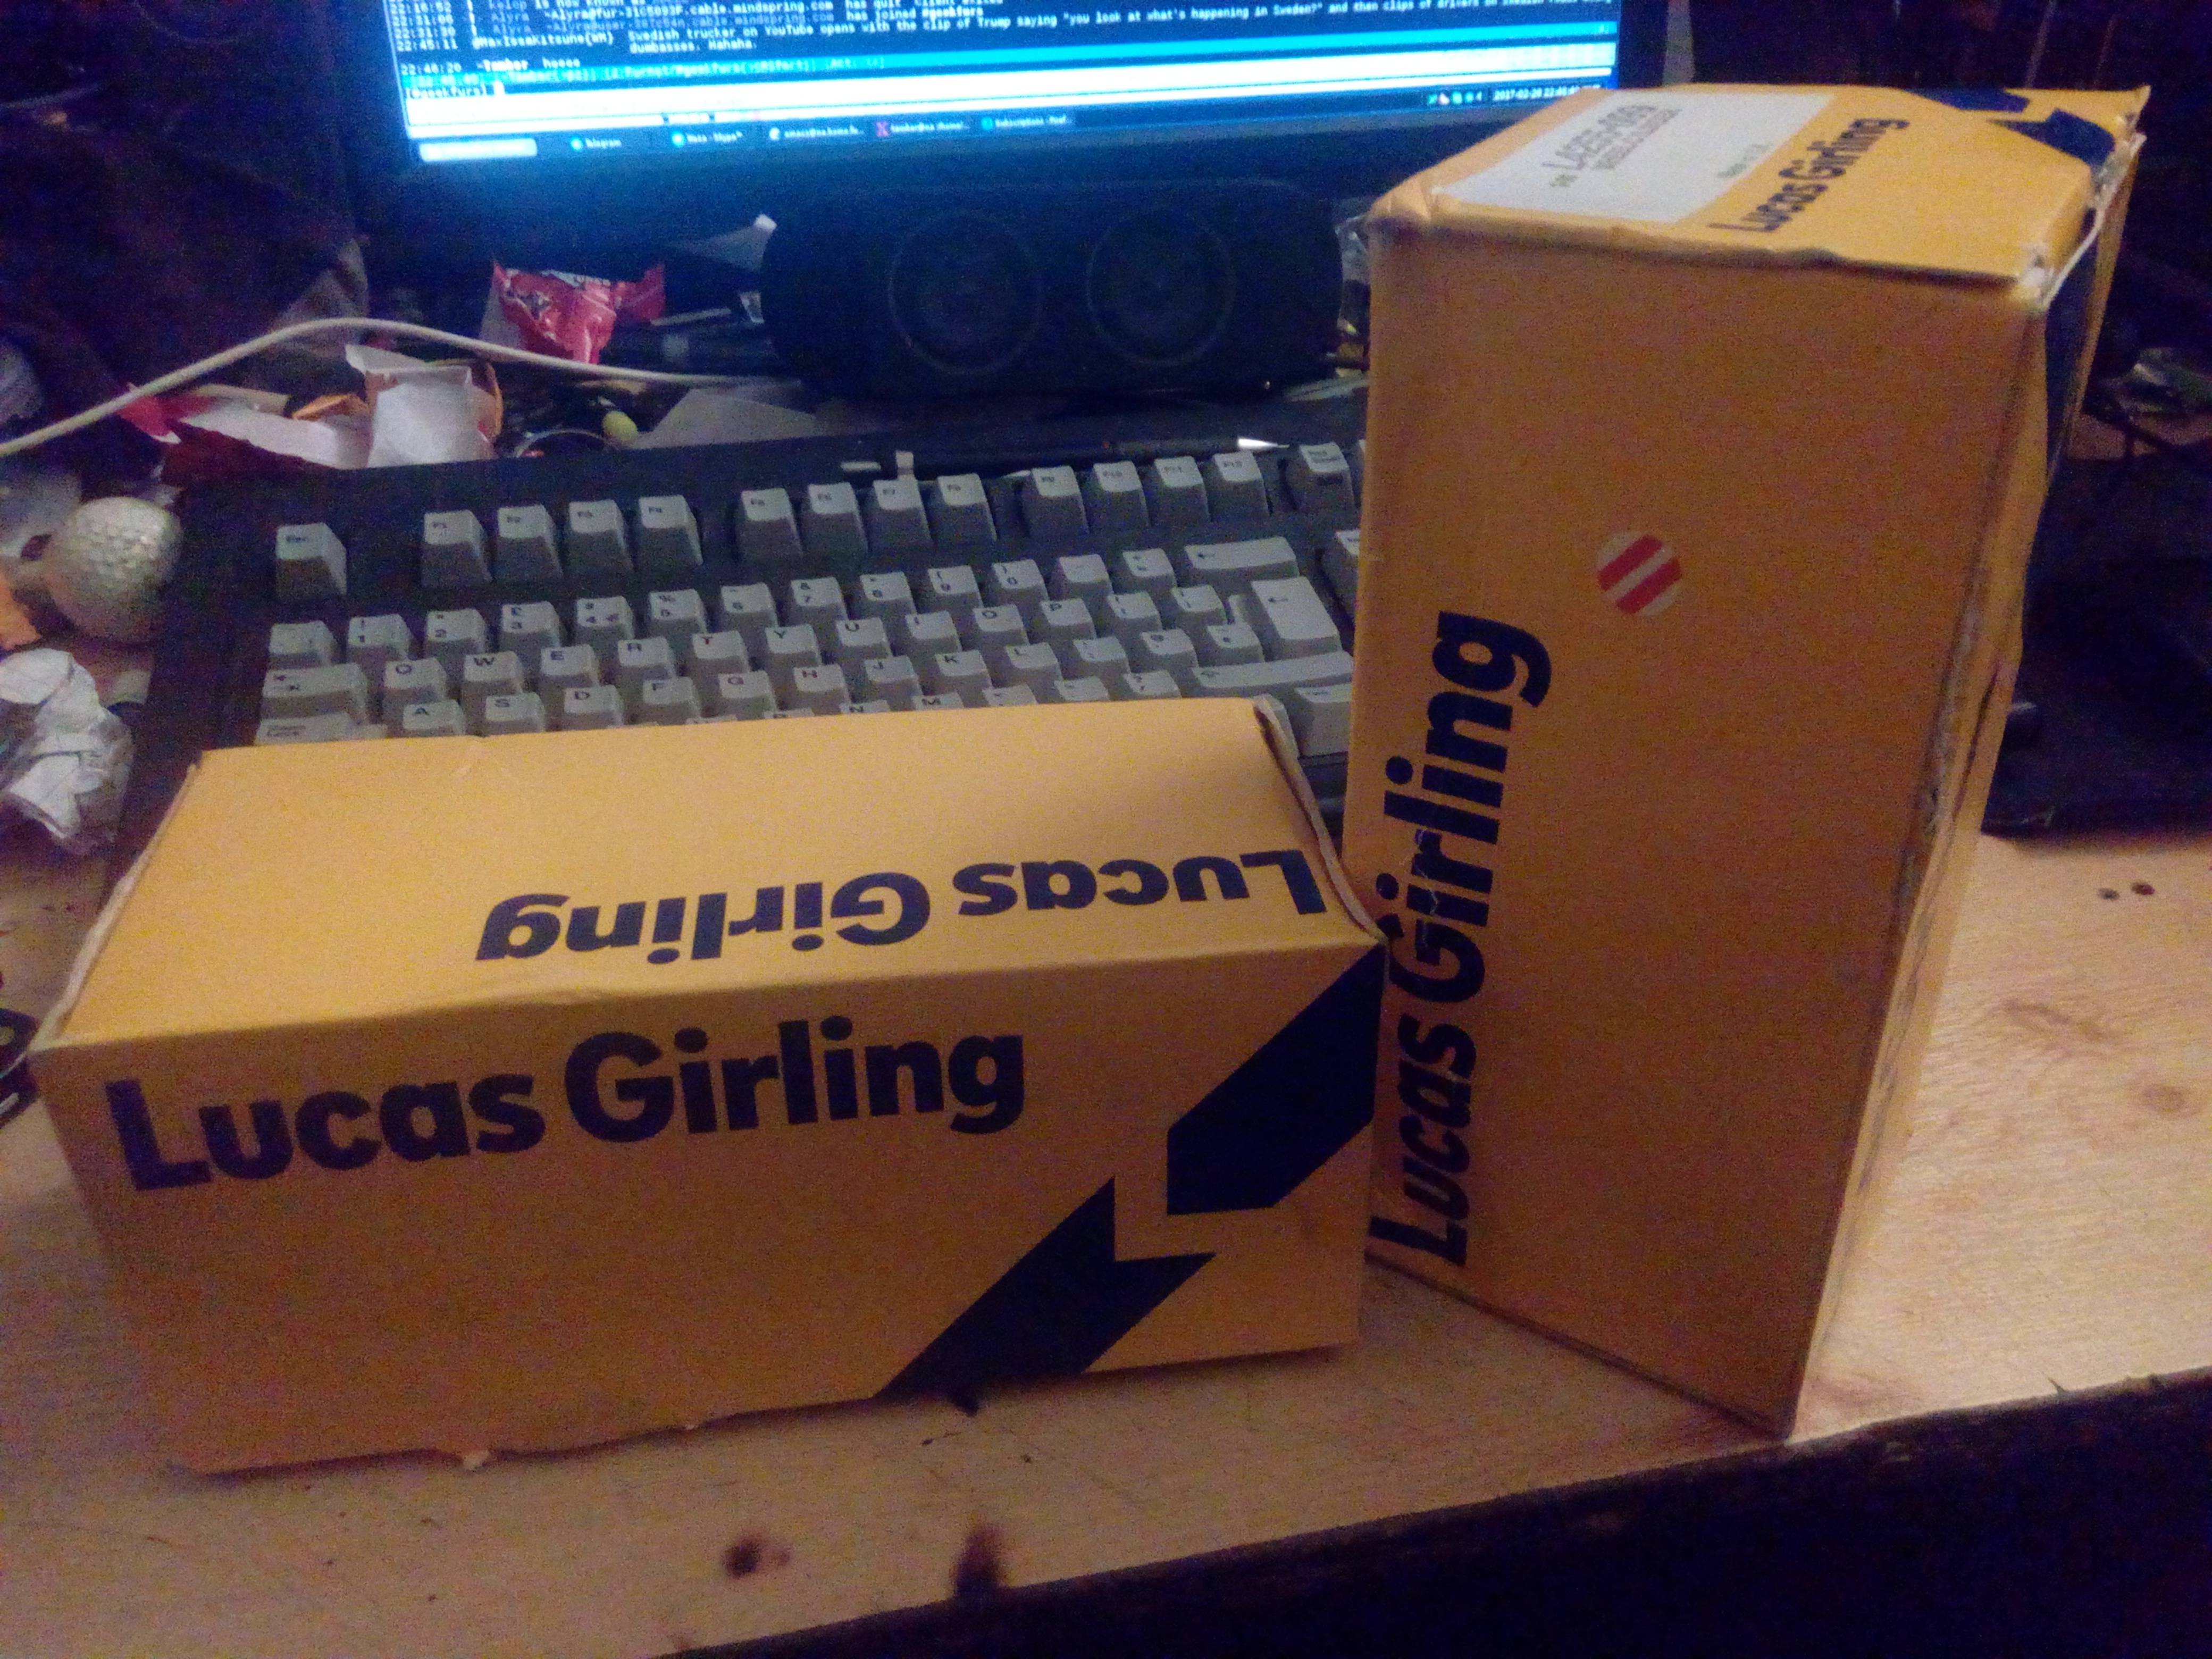 Photograph of a desk, with two yellow cardboard boxes sat on
it. The boxes are labelled, in dark blue text, 'Lucas Girling'.